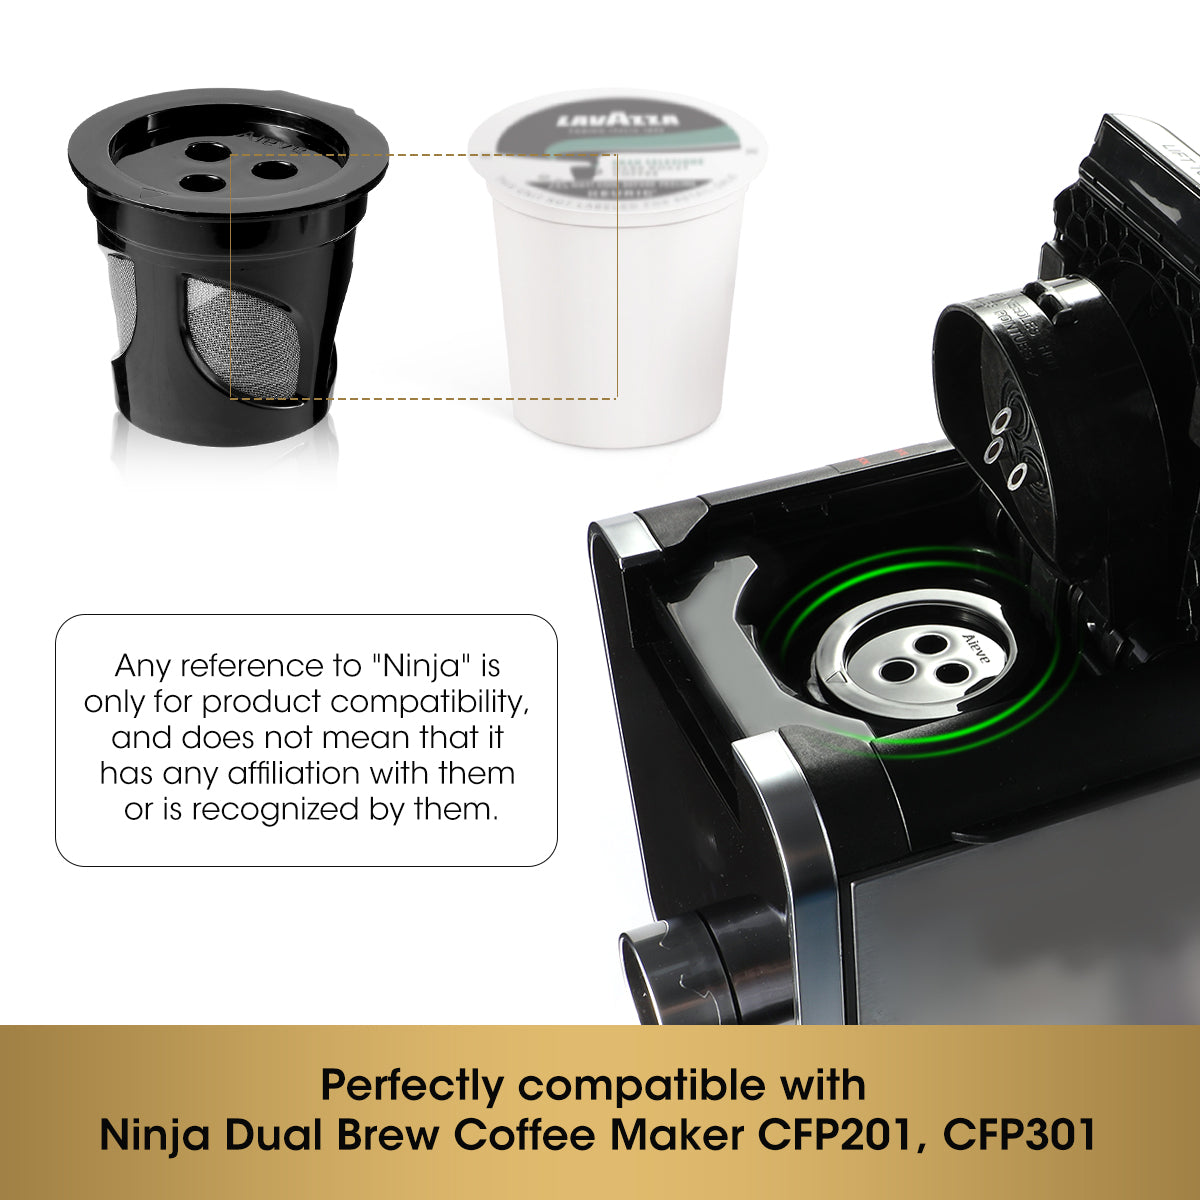 K Cup is perfectly compatible with Ninja Dual Brew Coffee Maker CFP201, CFP301